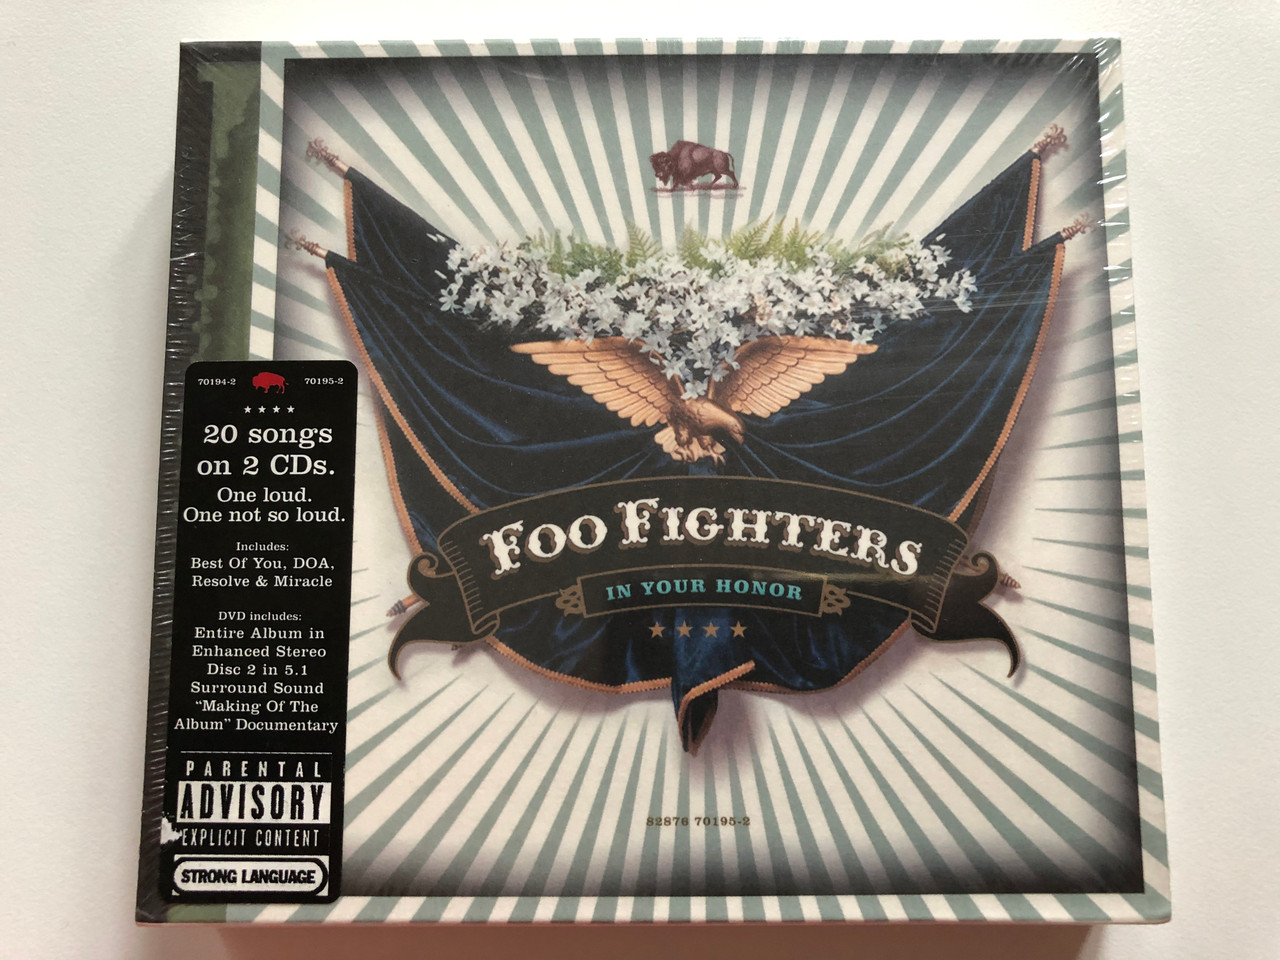 https://cdn10.bigcommerce.com/s-62bdpkt7pb/products/0/images/207601/Foo_Fighters_In_Your_Honor_20_songs_on_2_CDs._One_loud._One_not_so_loud._Includes_Best_Of_You_DOA_Resolve_Miracle._DVD_Includes_Entire_Album_in_Enhanced_Stereo_Disc_2_RCA_2x_Audio_CD_1__95733.1642408050.1280.1280.JPG?c=2&_gl=1*1nhj1bg*_ga*MjA2NTIxMjE2MC4xNTkwNTEyNTMy*_ga_WS2VZYPC6G*MTY0MjQwMzU5OS4yNjQuMS4xNjQyNDA4MDI2LjYw